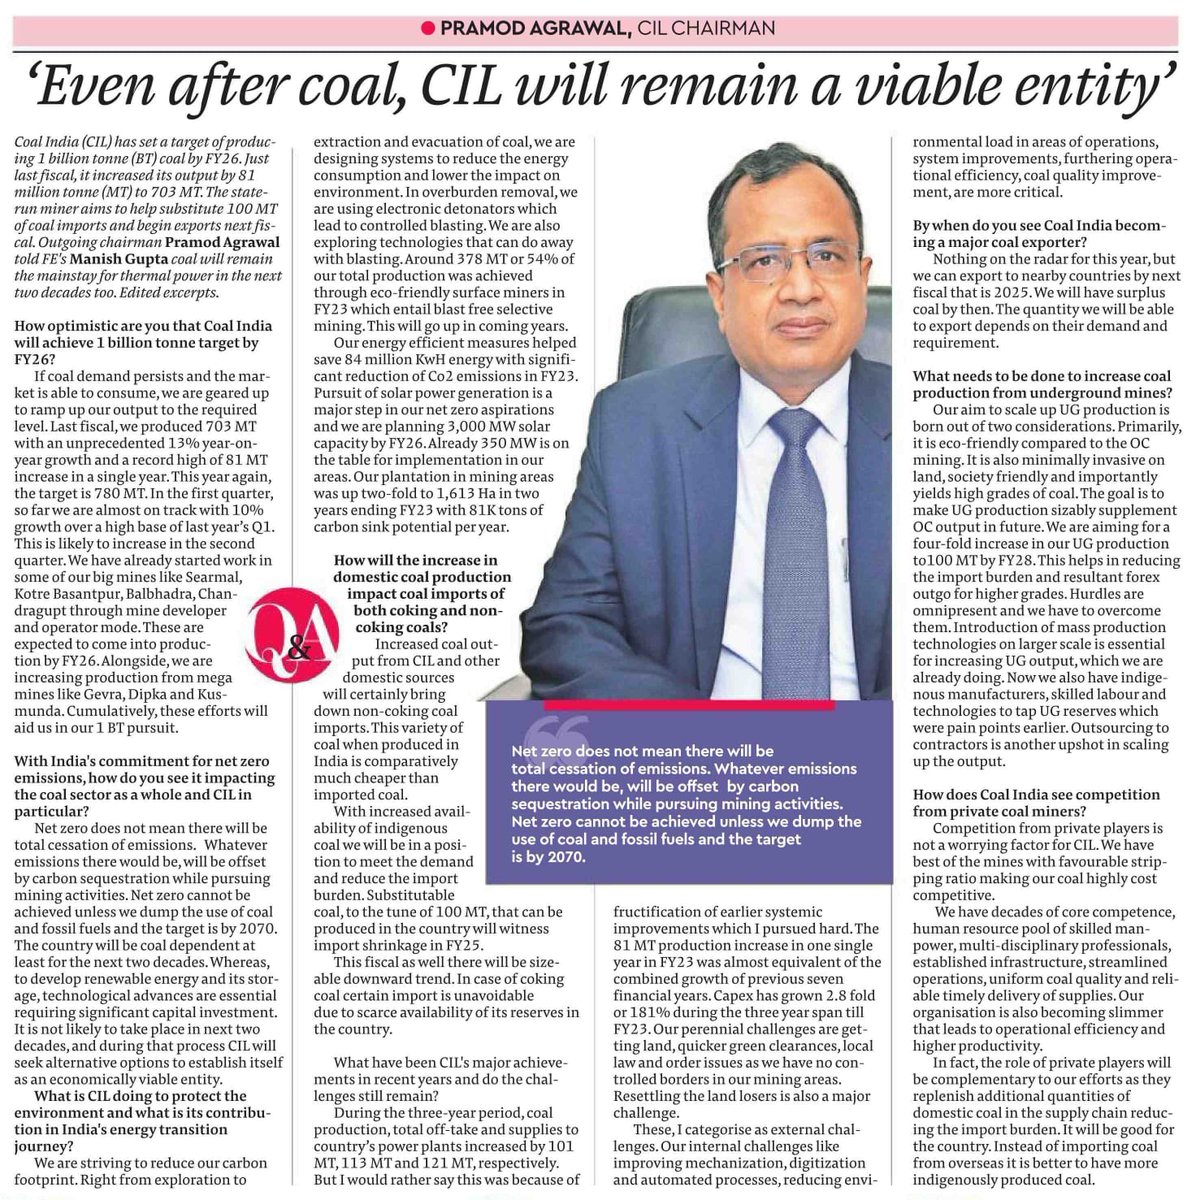 CHAIRMAN, COAL INDIA: HURDLES ARE OMNIPRESENT. WE HAVE TO OVERCOME THEM